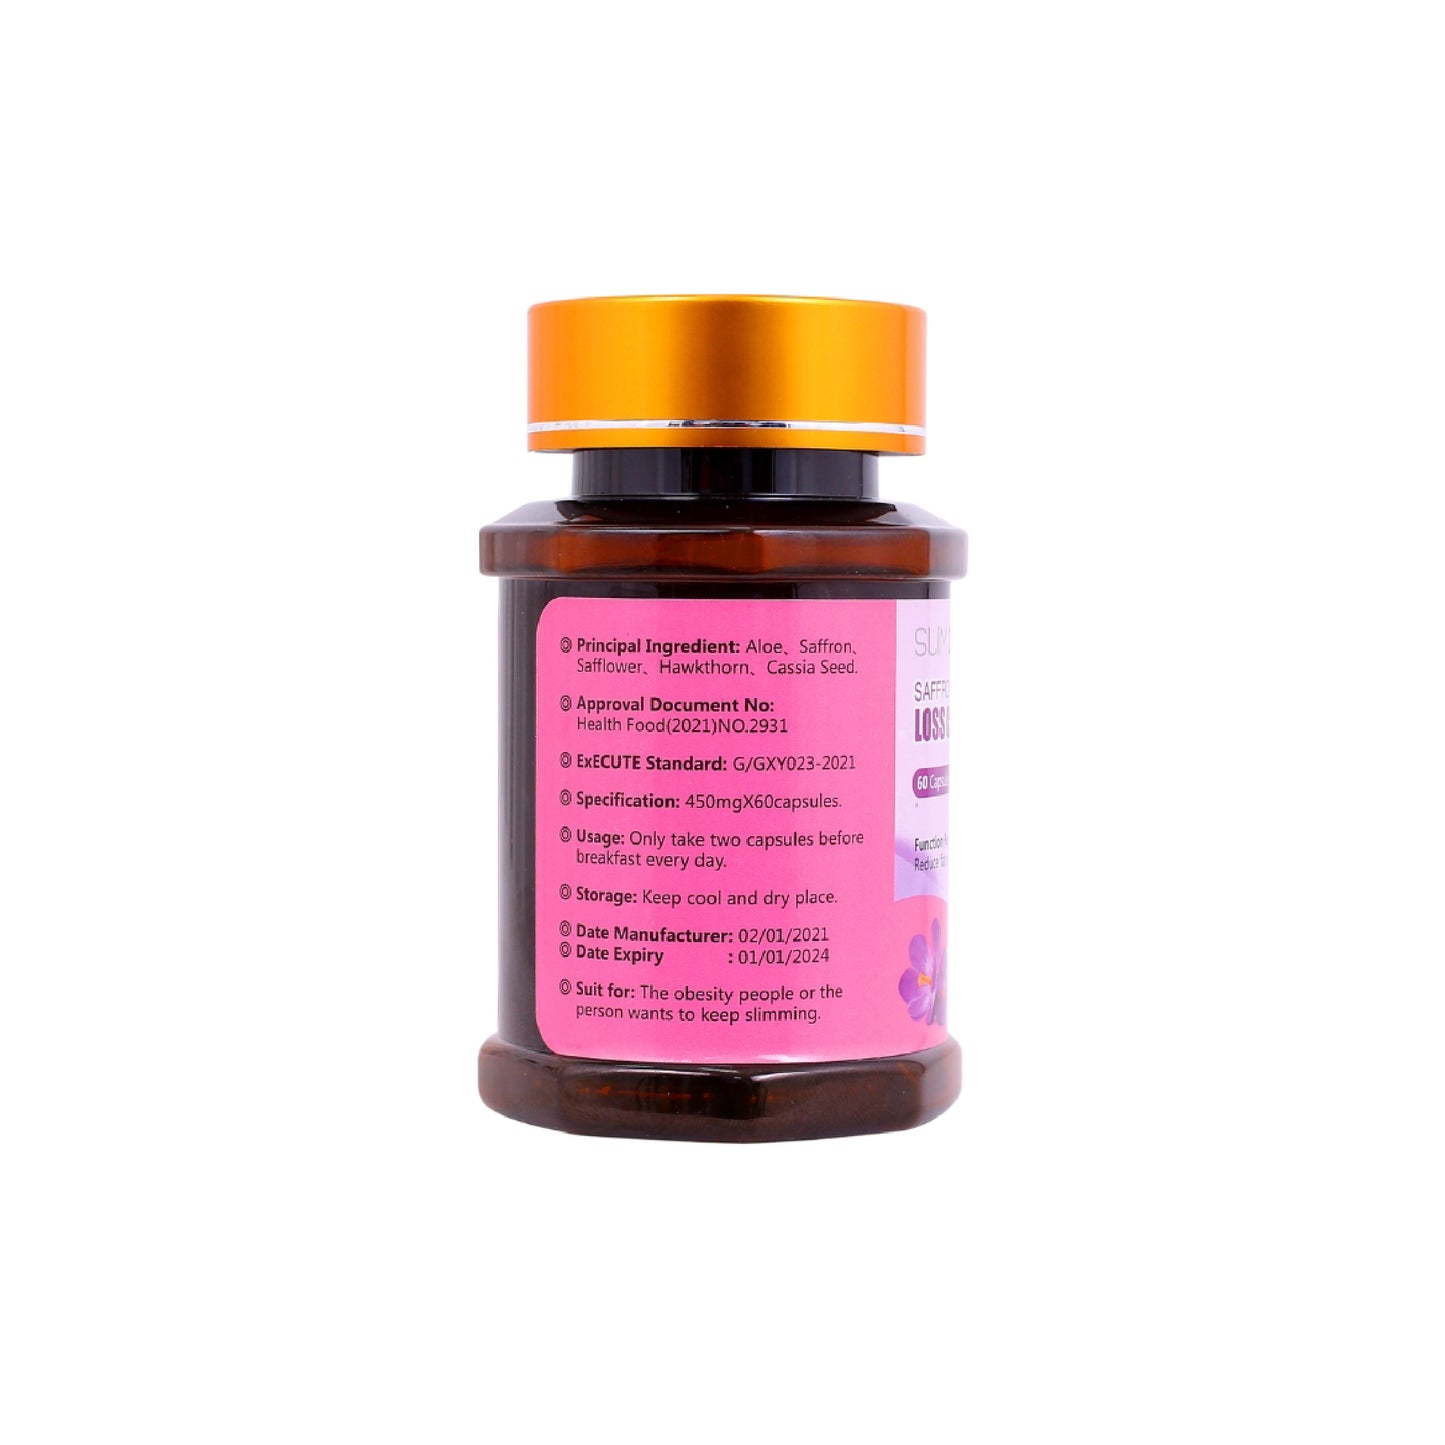 Slim Diet Saffron Weight Loss Capsules Benefits and Ingredients